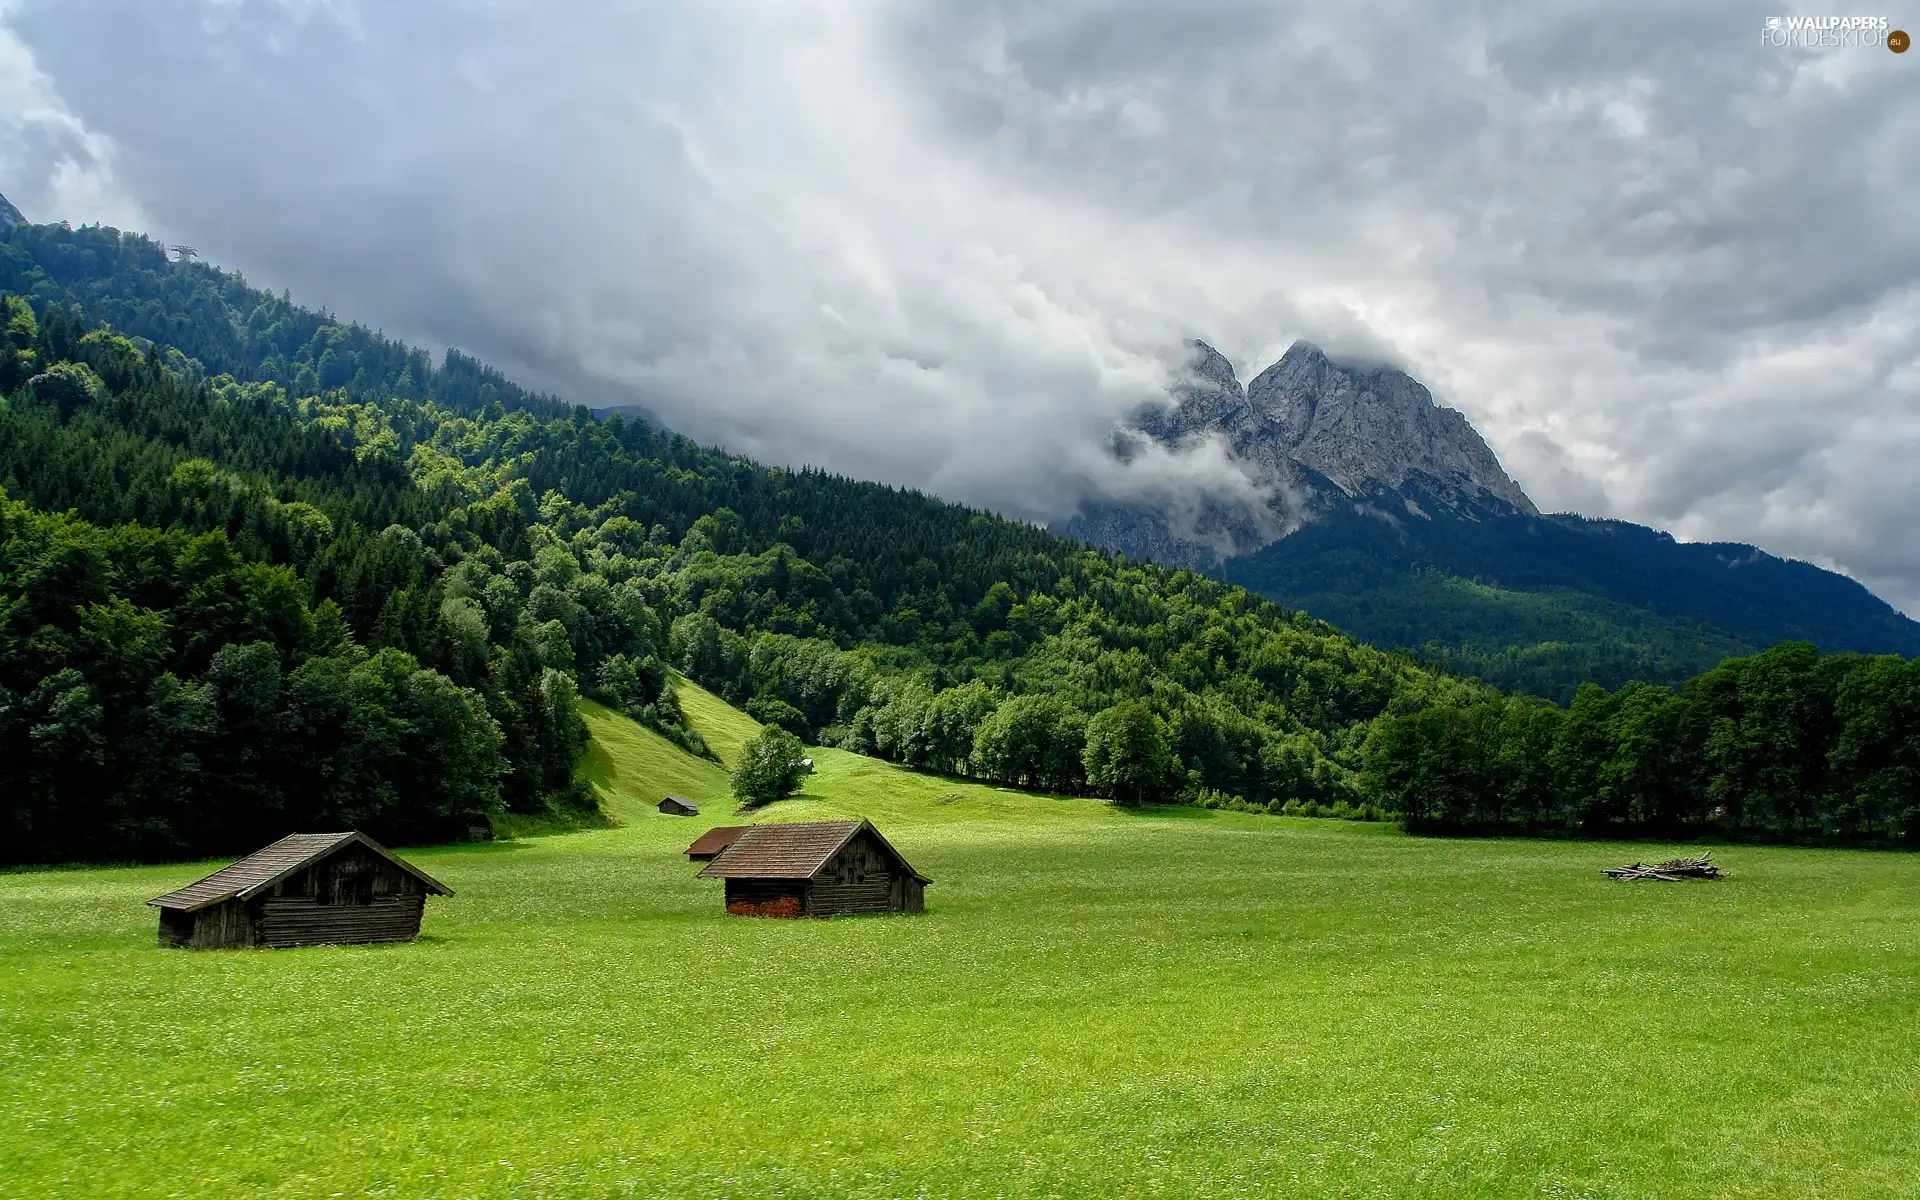 Meadow, Sheds, woods, clouds, Mountains